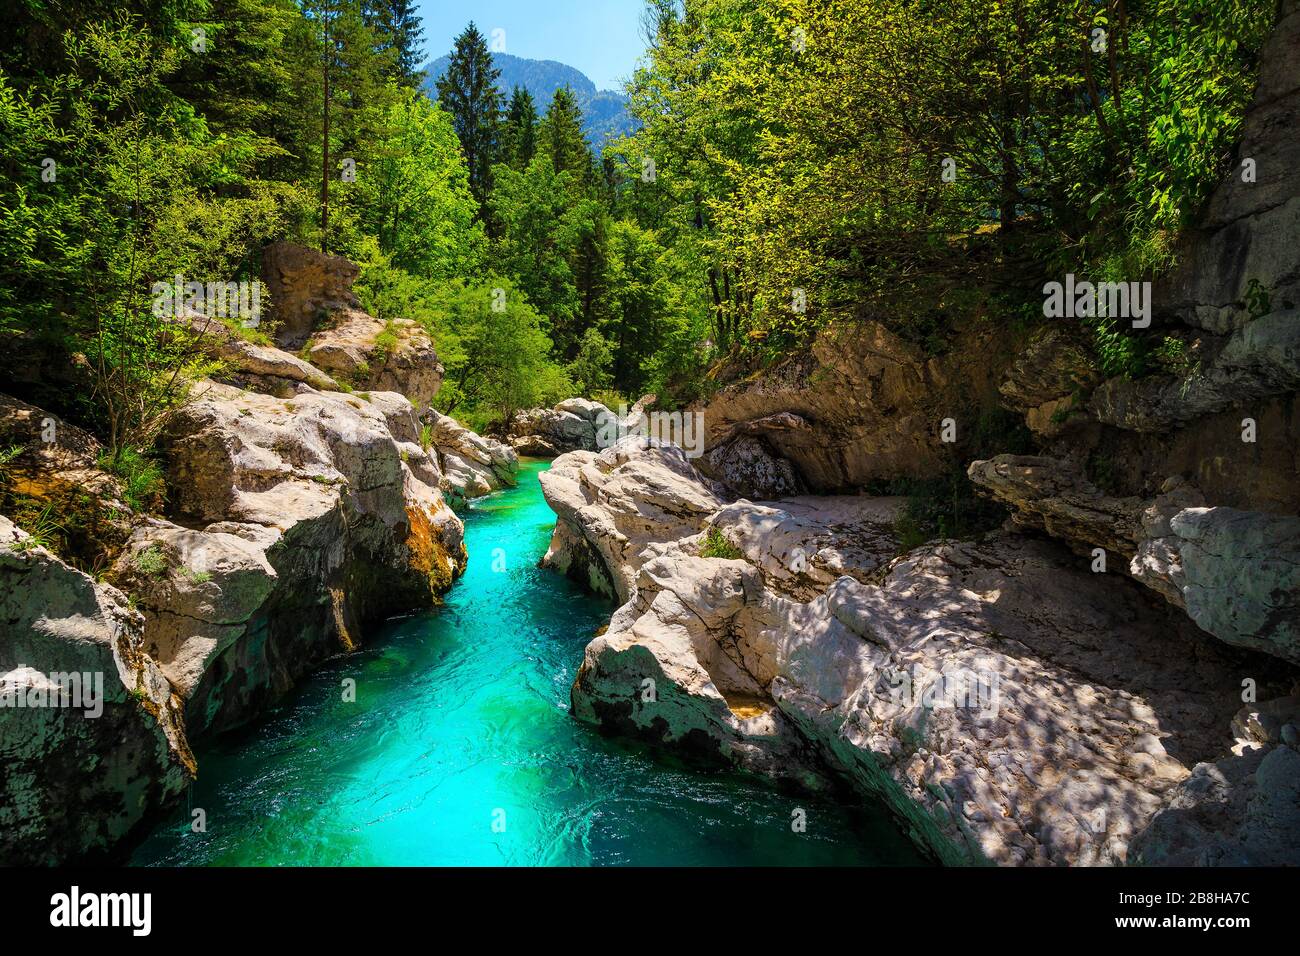 Great rafting and kayaking place in Europe. Majestic nature place with kayaking destination. Stunning turquoise Soca river and narrow gorge, Bovec, Sl Stock Photo